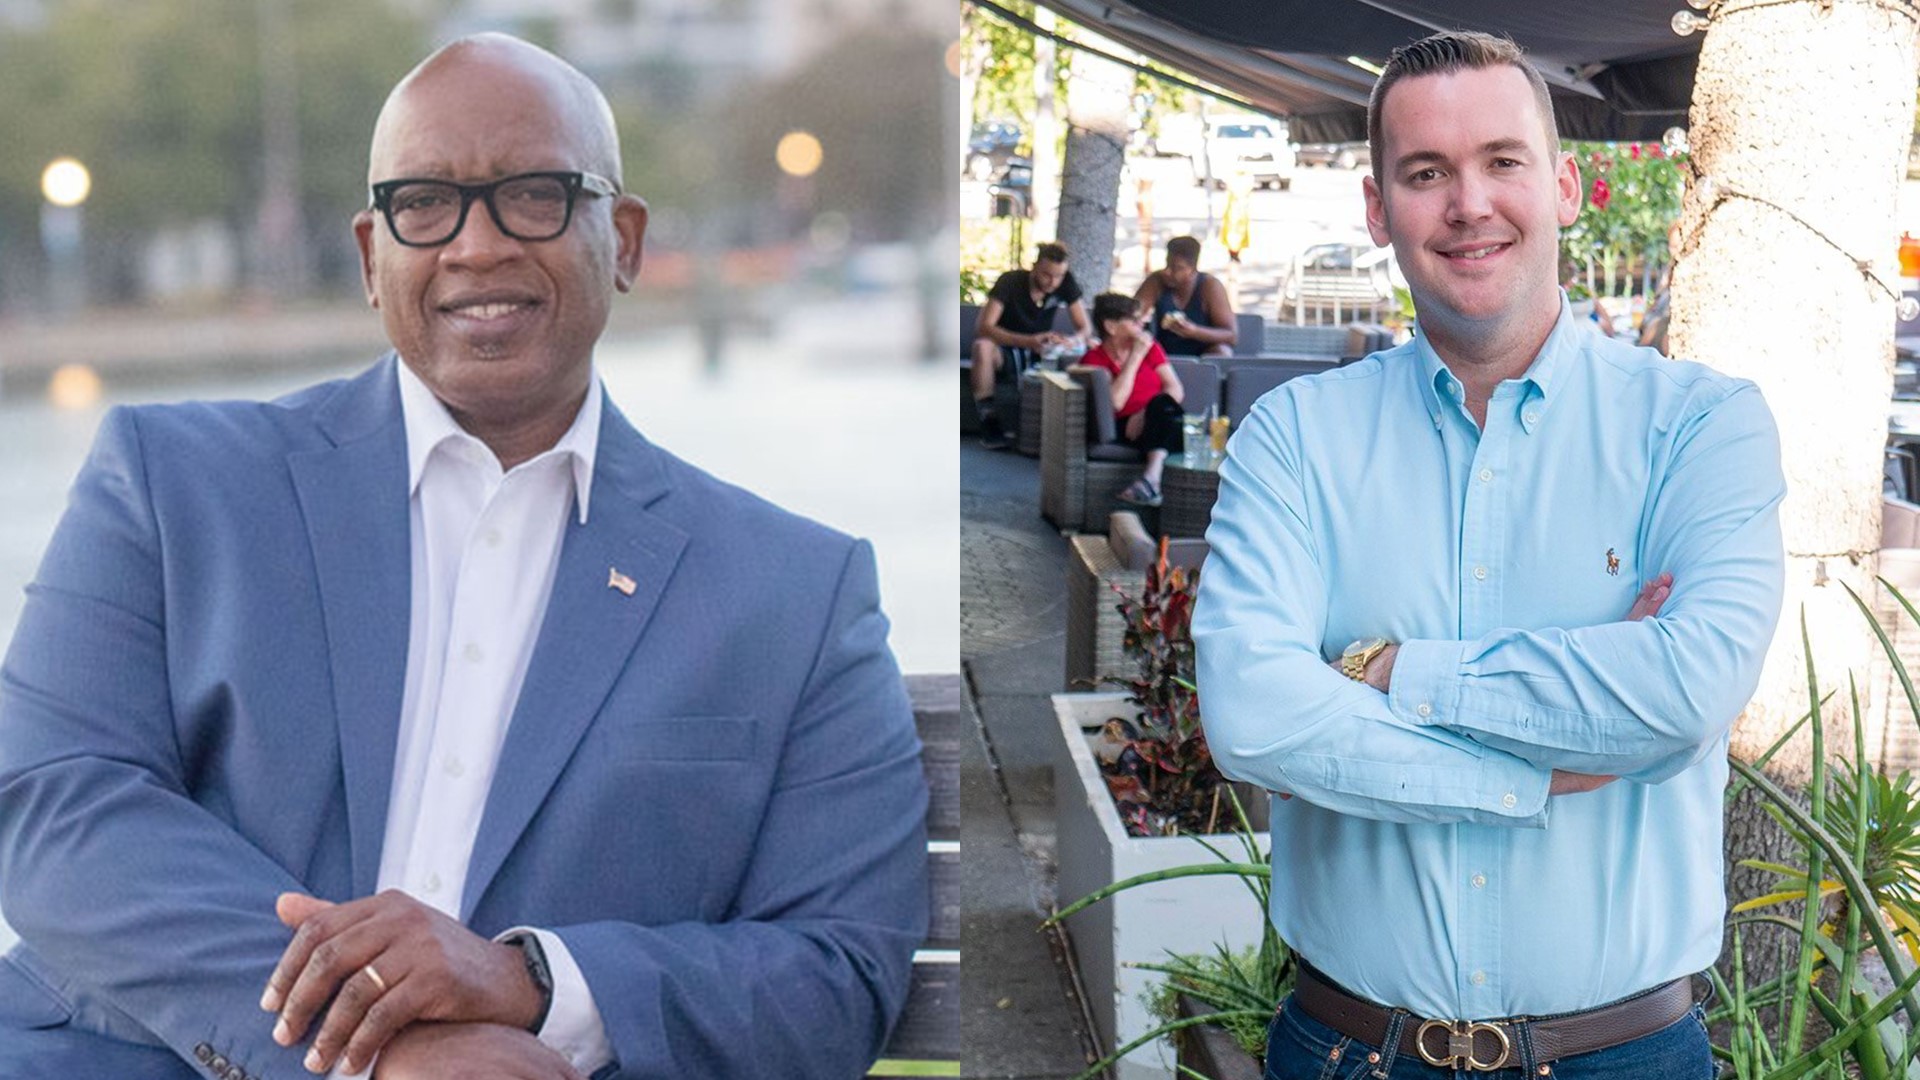 Ahead of St. Pete’s election for mayor in November, we asked Ken Welch and Robert Blackmon the same 10 questions, ranging in topics from affordable housing to sports